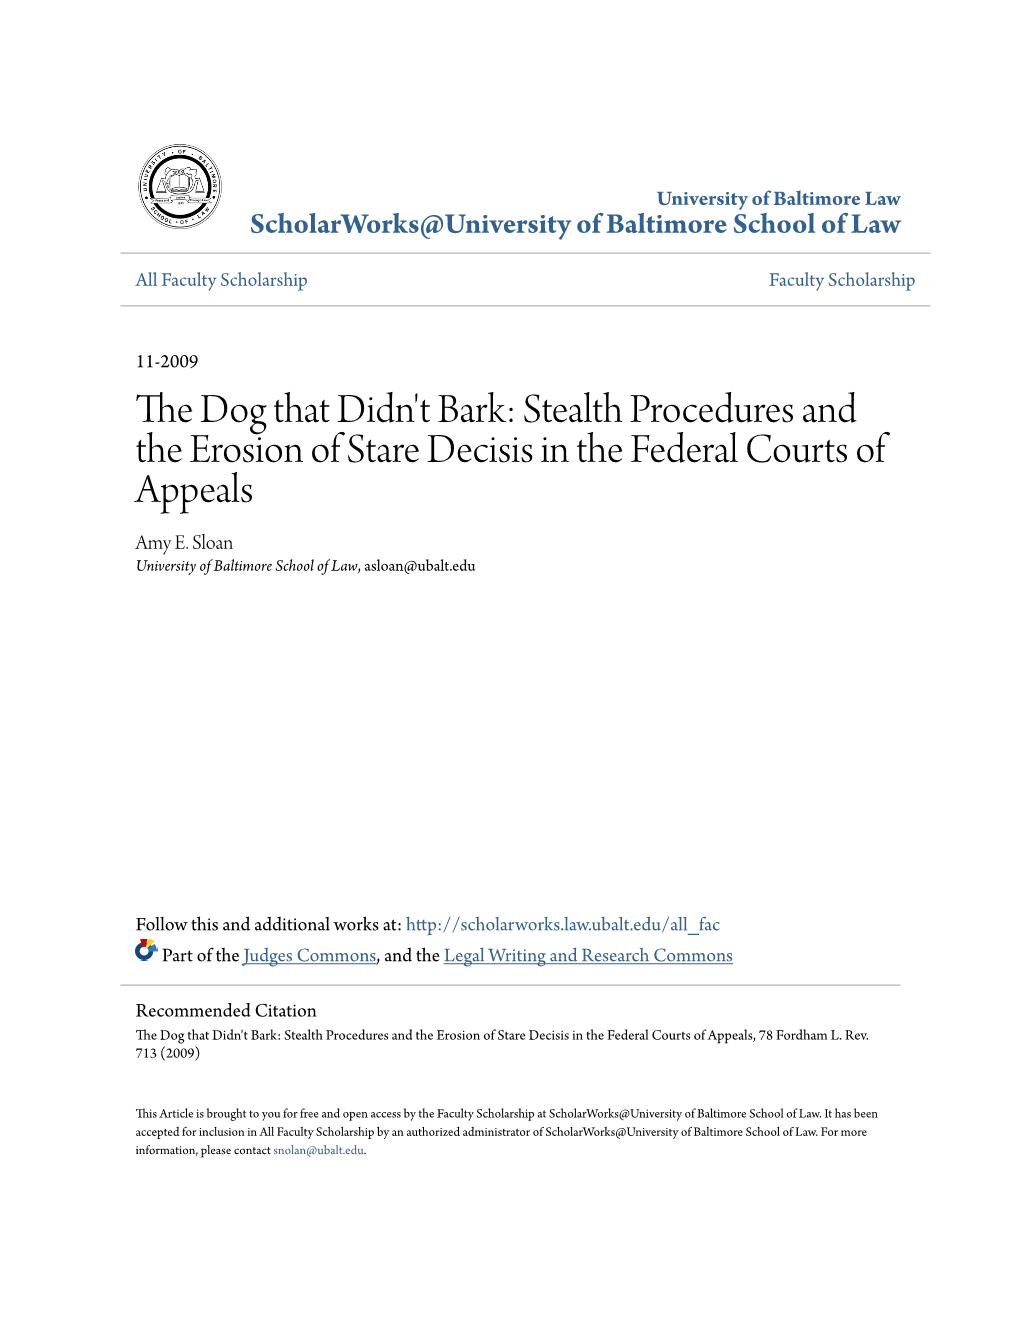 Stealth Procedures and the Erosion of Stare Decisis in the Federal Courts of Appeals Amy E